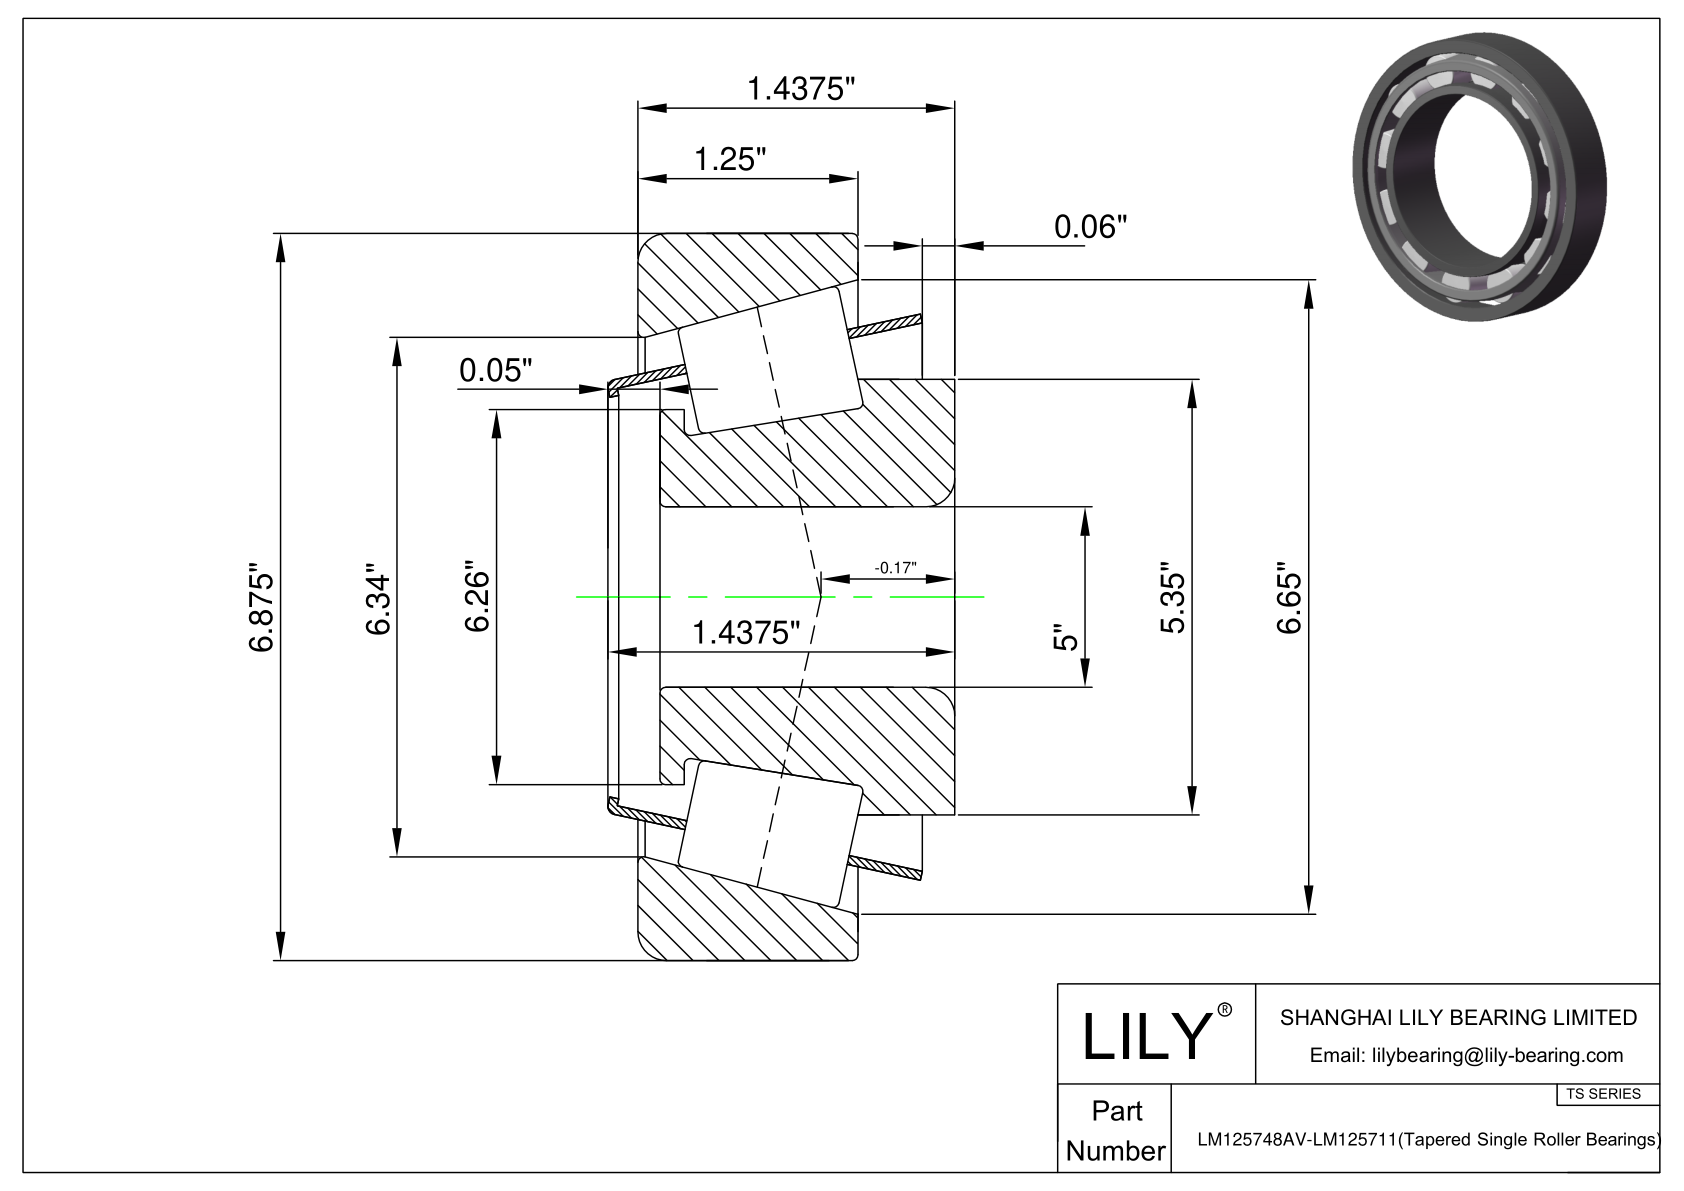 LM125748AV-LM125711 TS (Tapered Single Roller Bearings) (Imperial) cad drawing